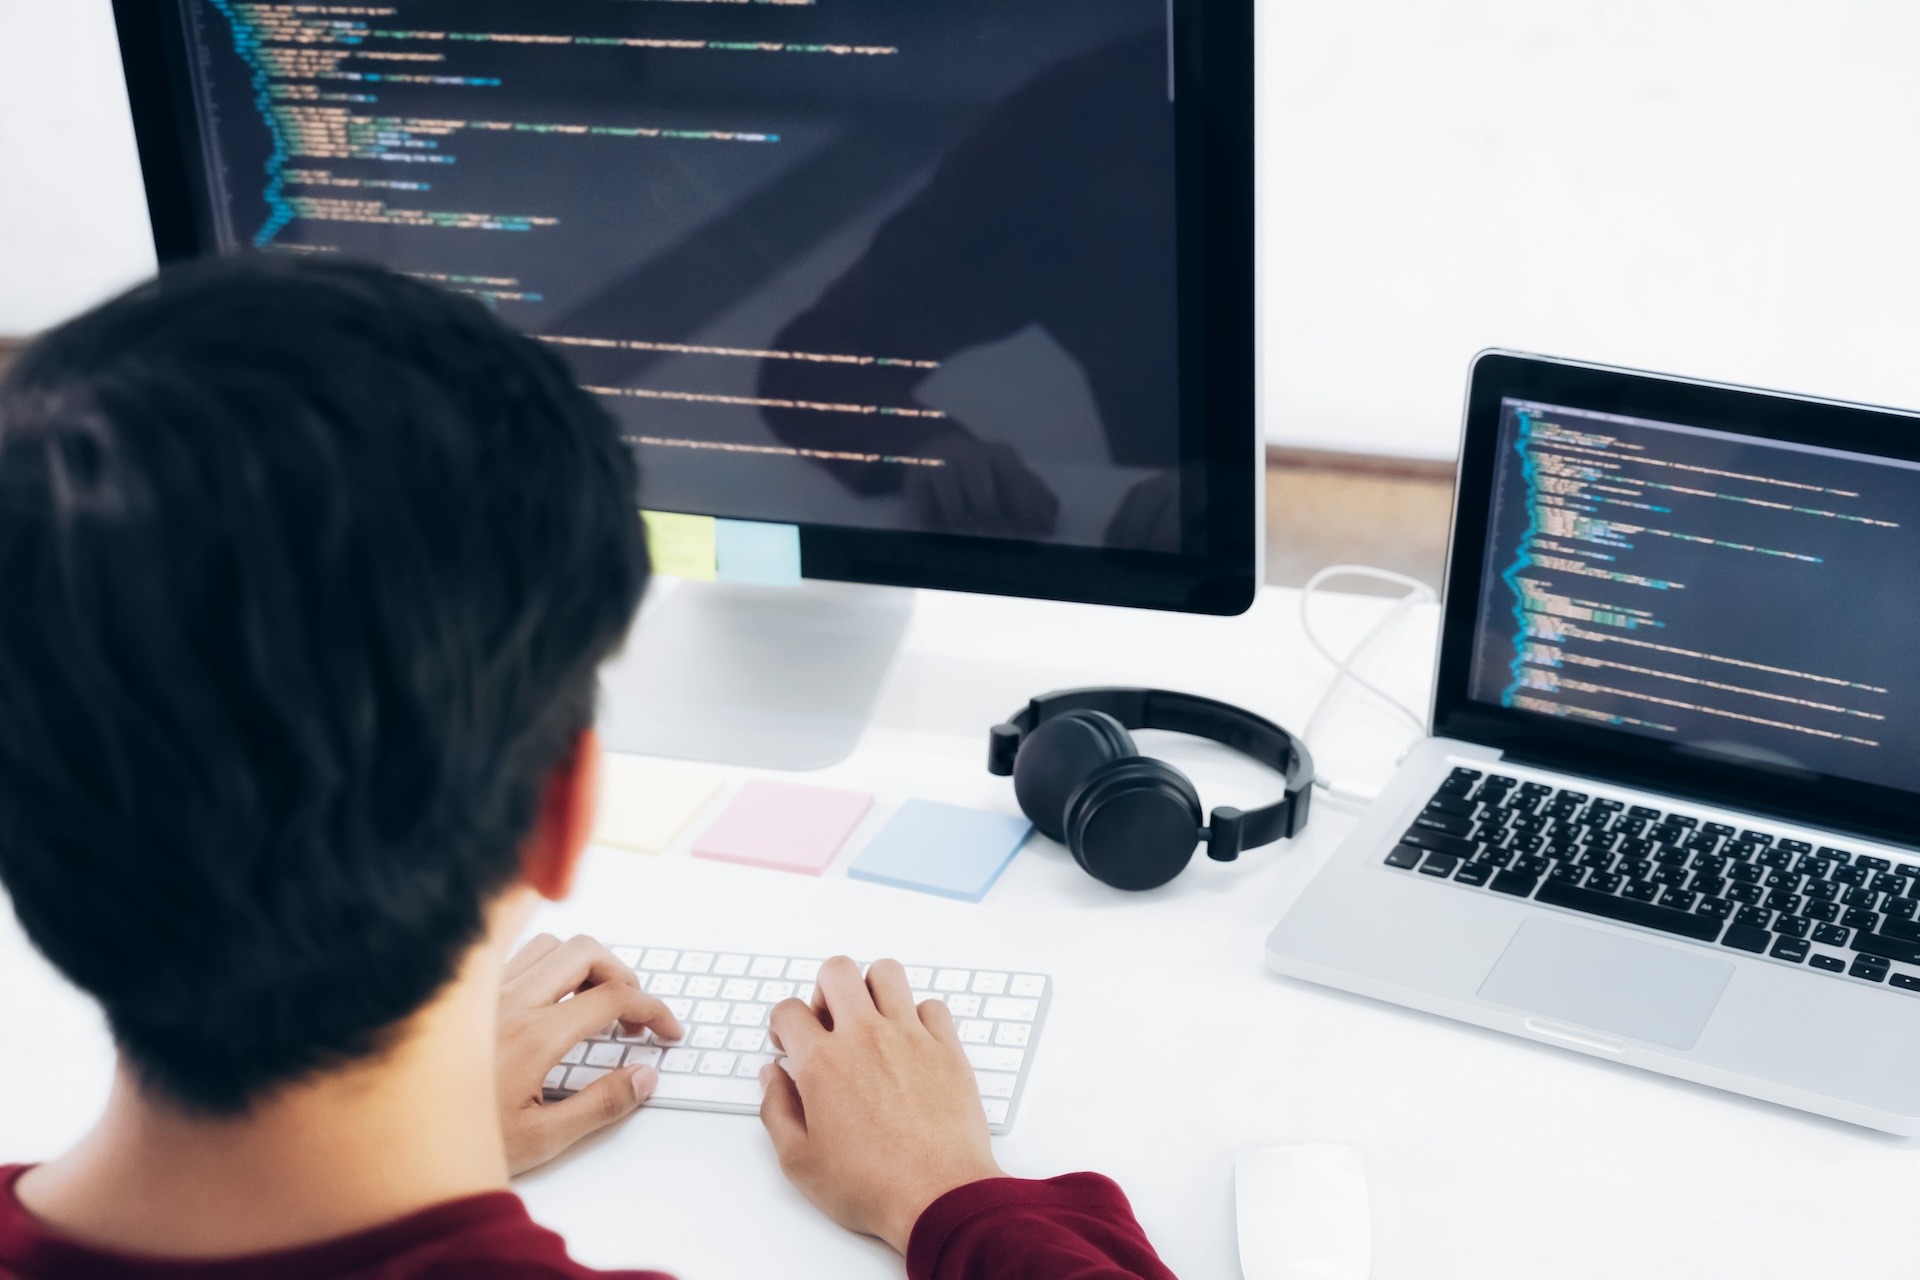 Programmers and developer teams are coding and developing fintech software.